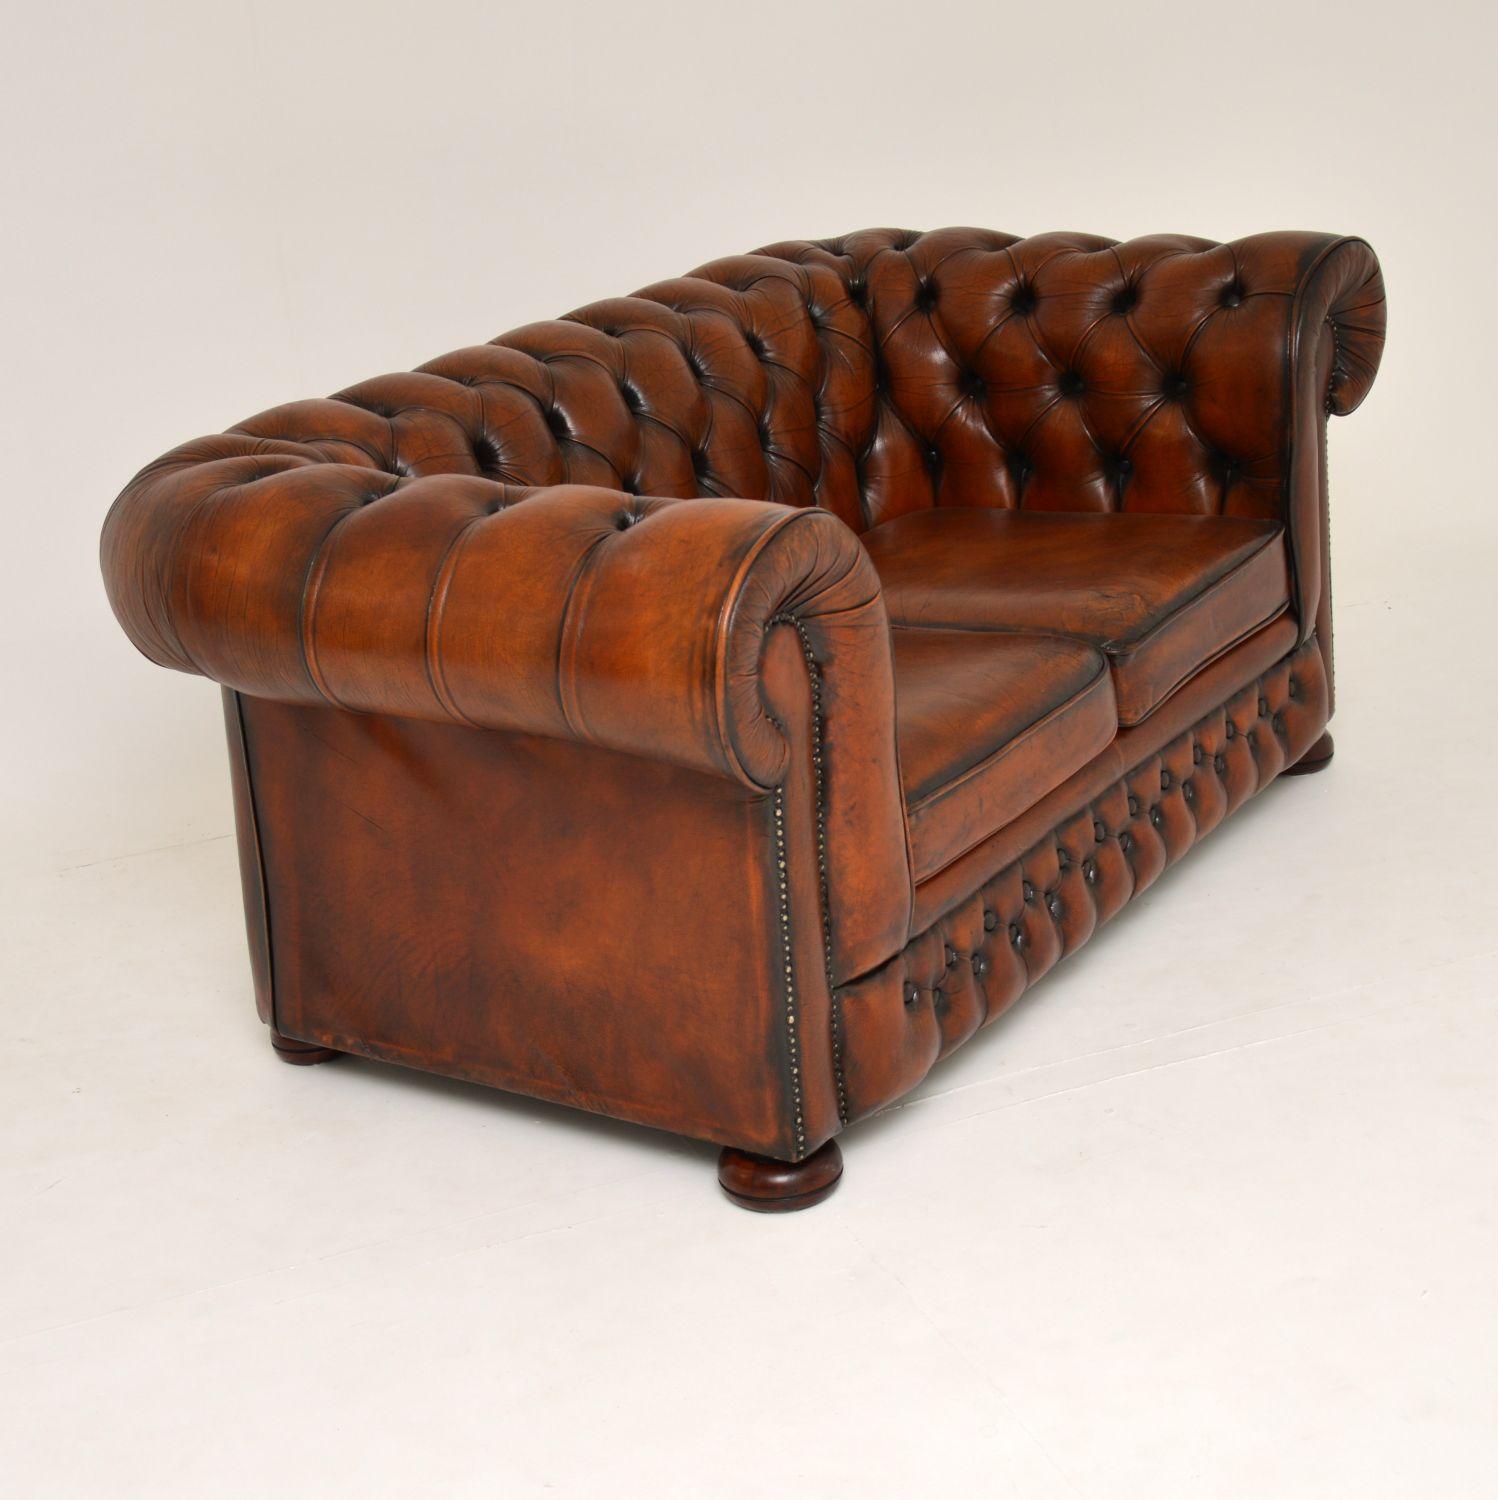 Mid-20th Century Antique Victorian Style Leather 2-Seat Chesterfield Sofa